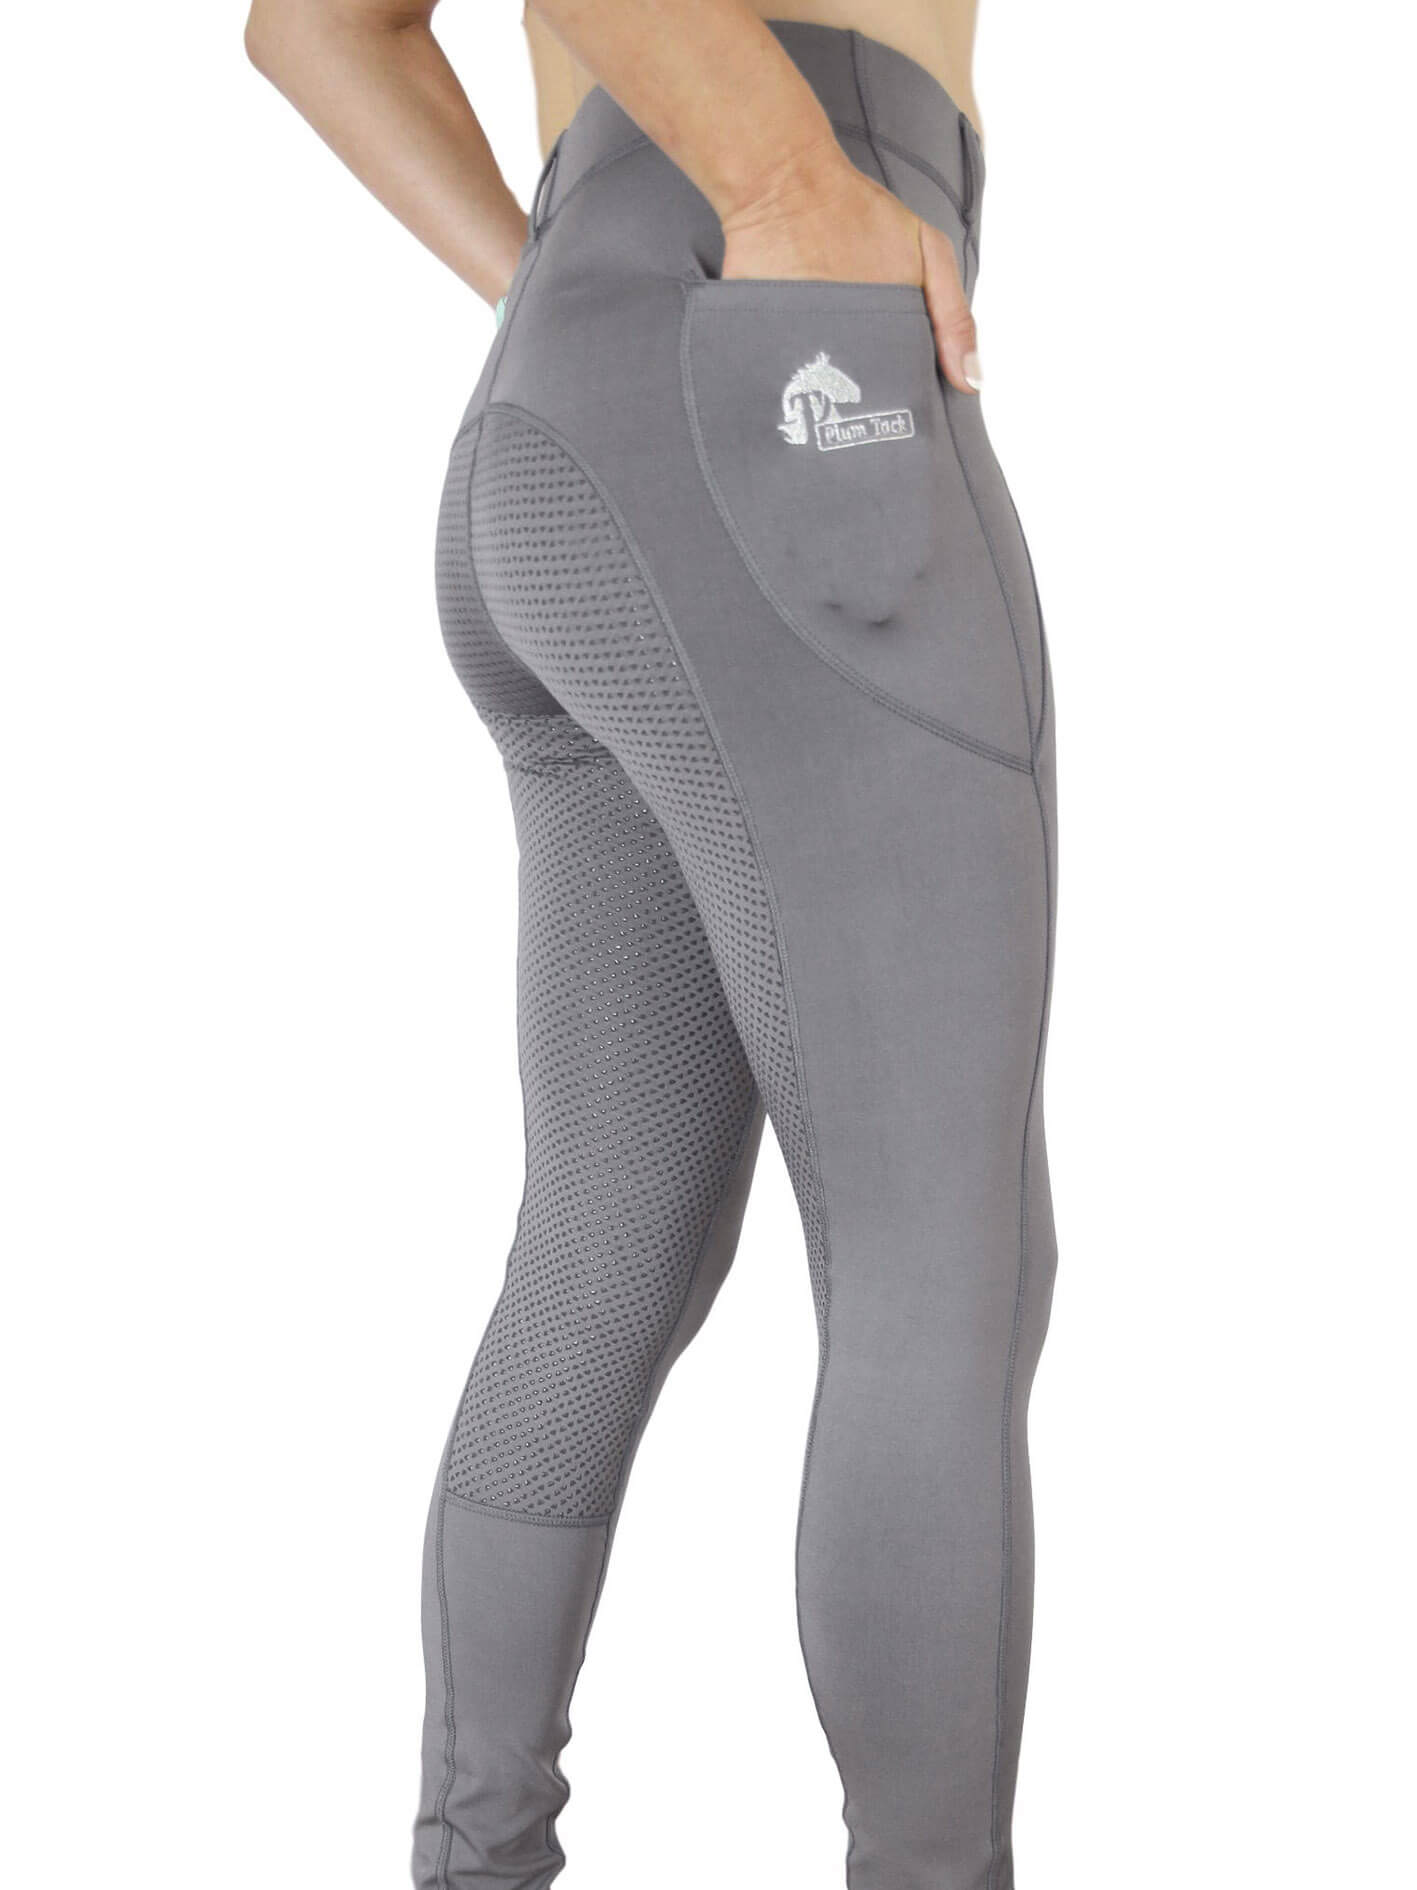 Gray horse riding tights on person, close-up side view.